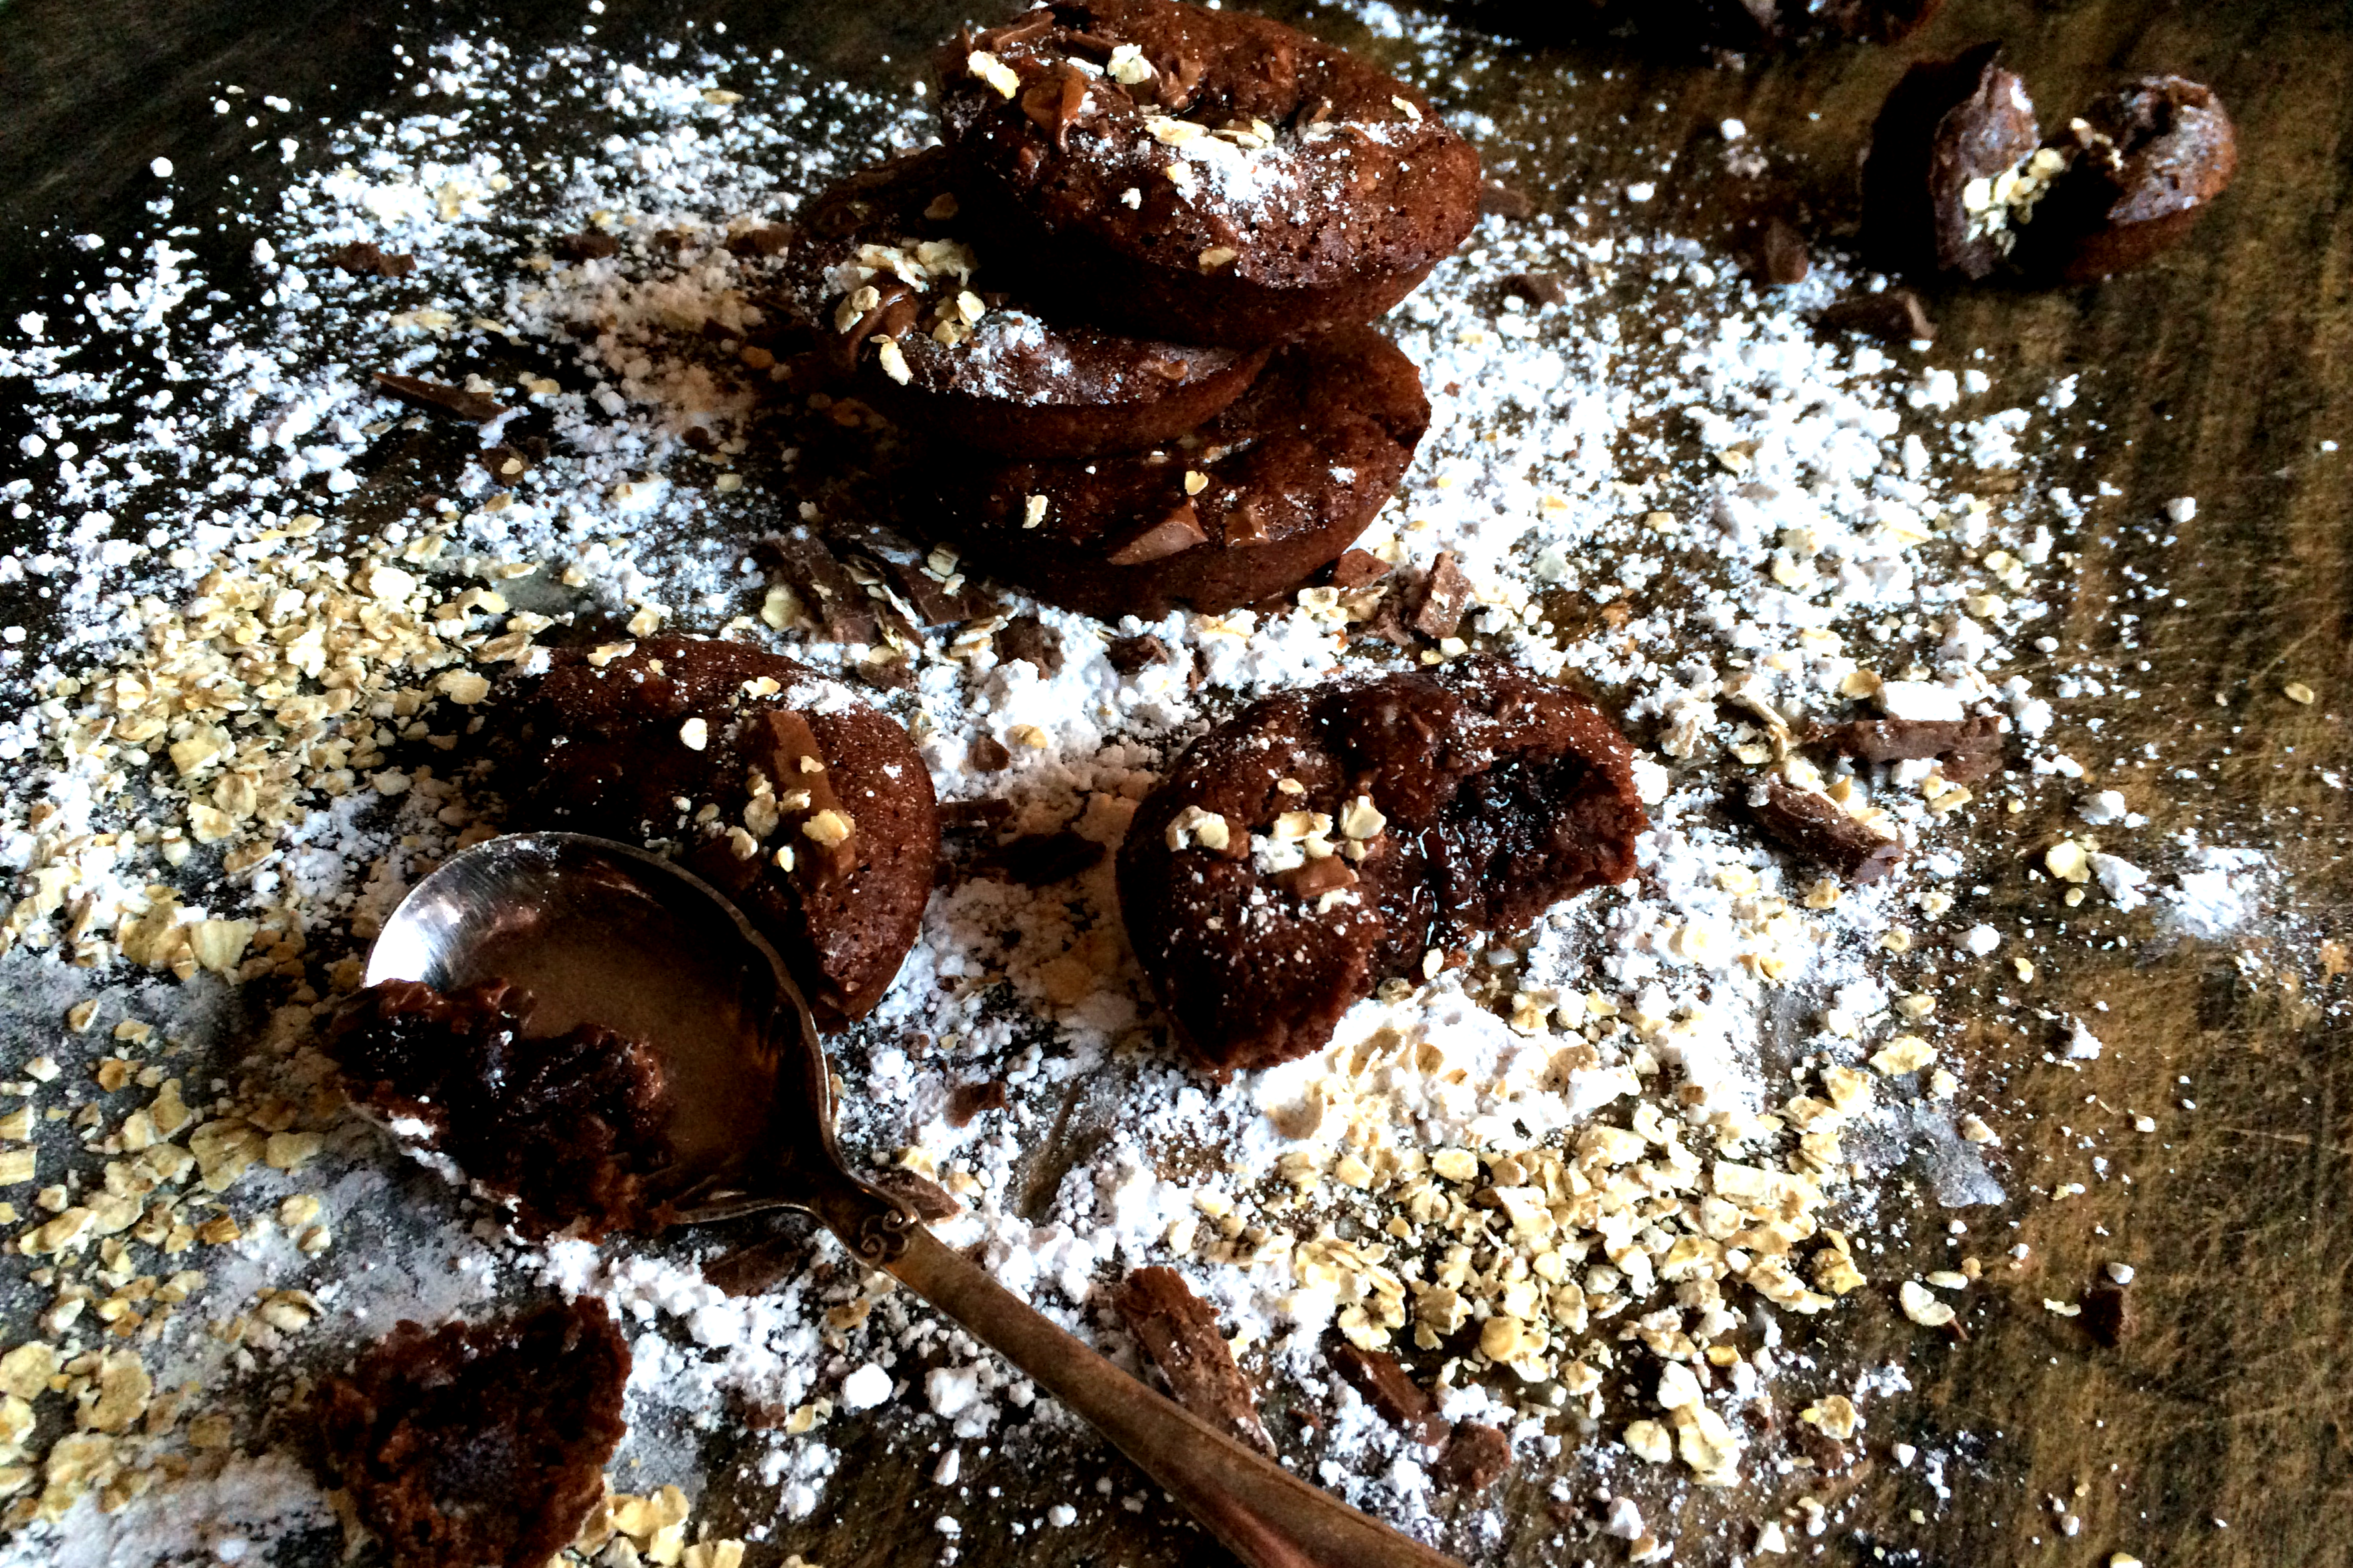 “Brownie toppers” with milk chocolate & oatmeal